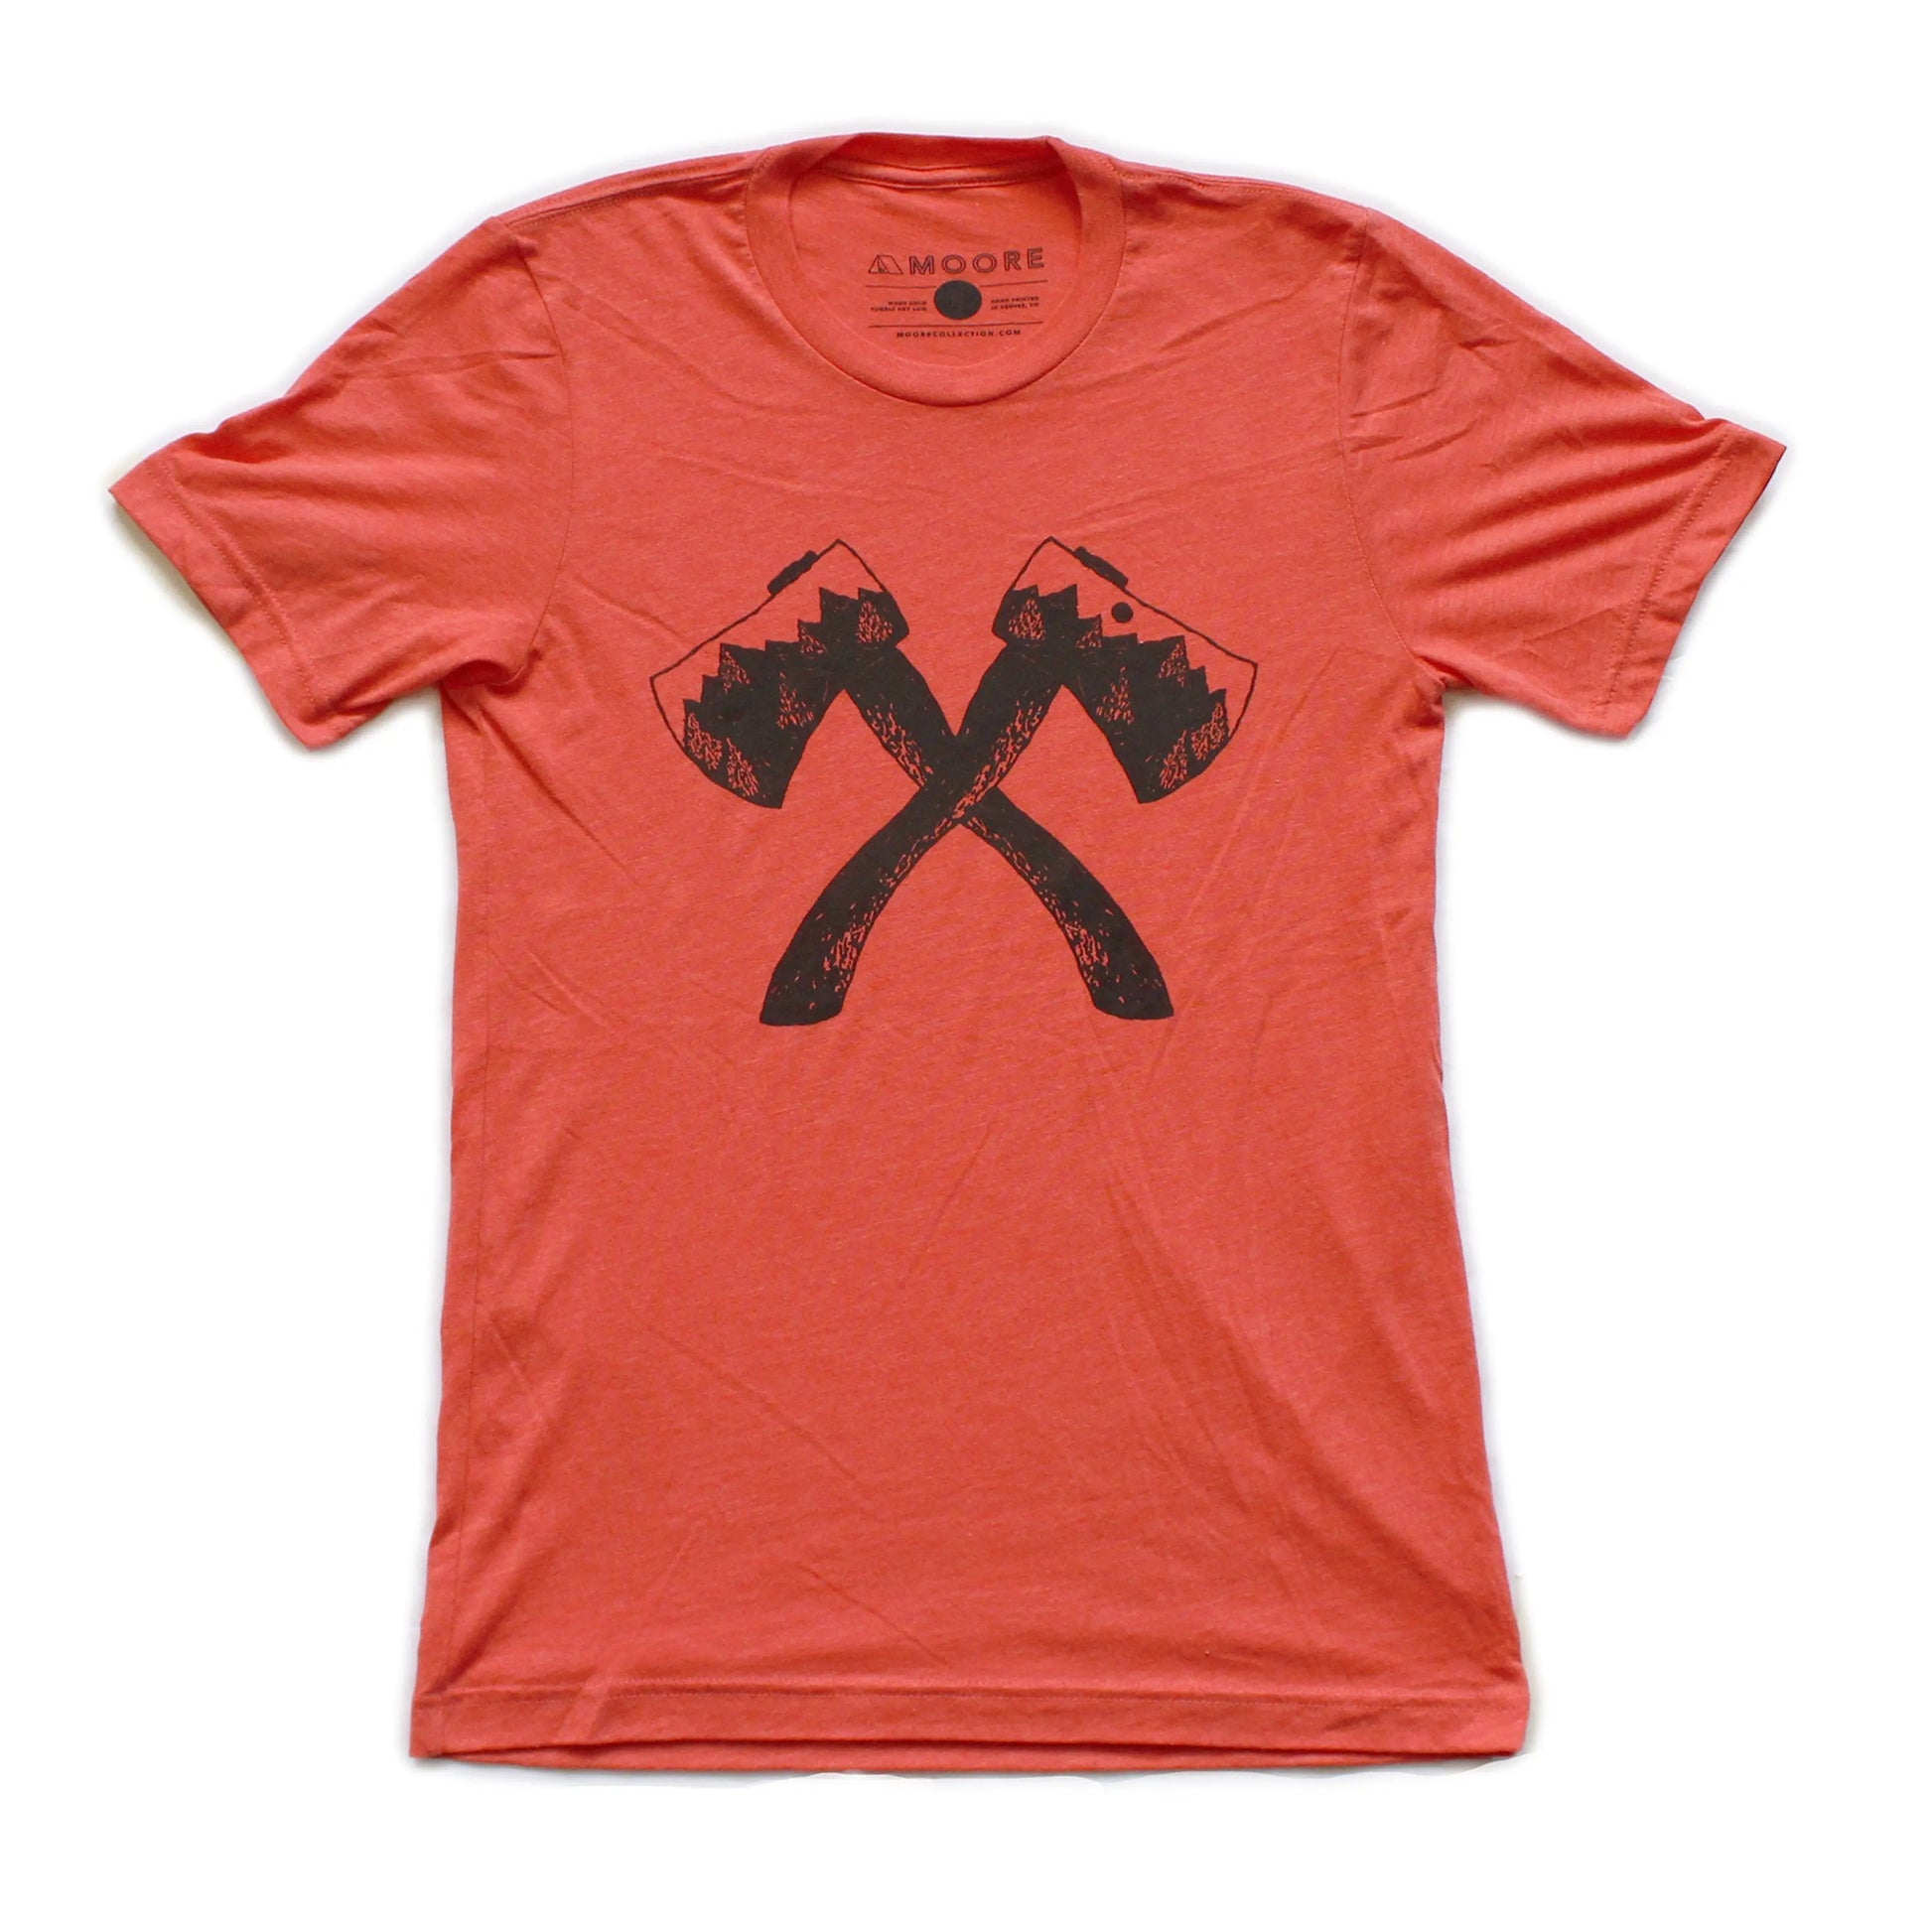 Axe Tee-Red Triblend  Apparel & Accessories > Clothing > Shirts & Tops 70.99 EZYSELLA SHOP